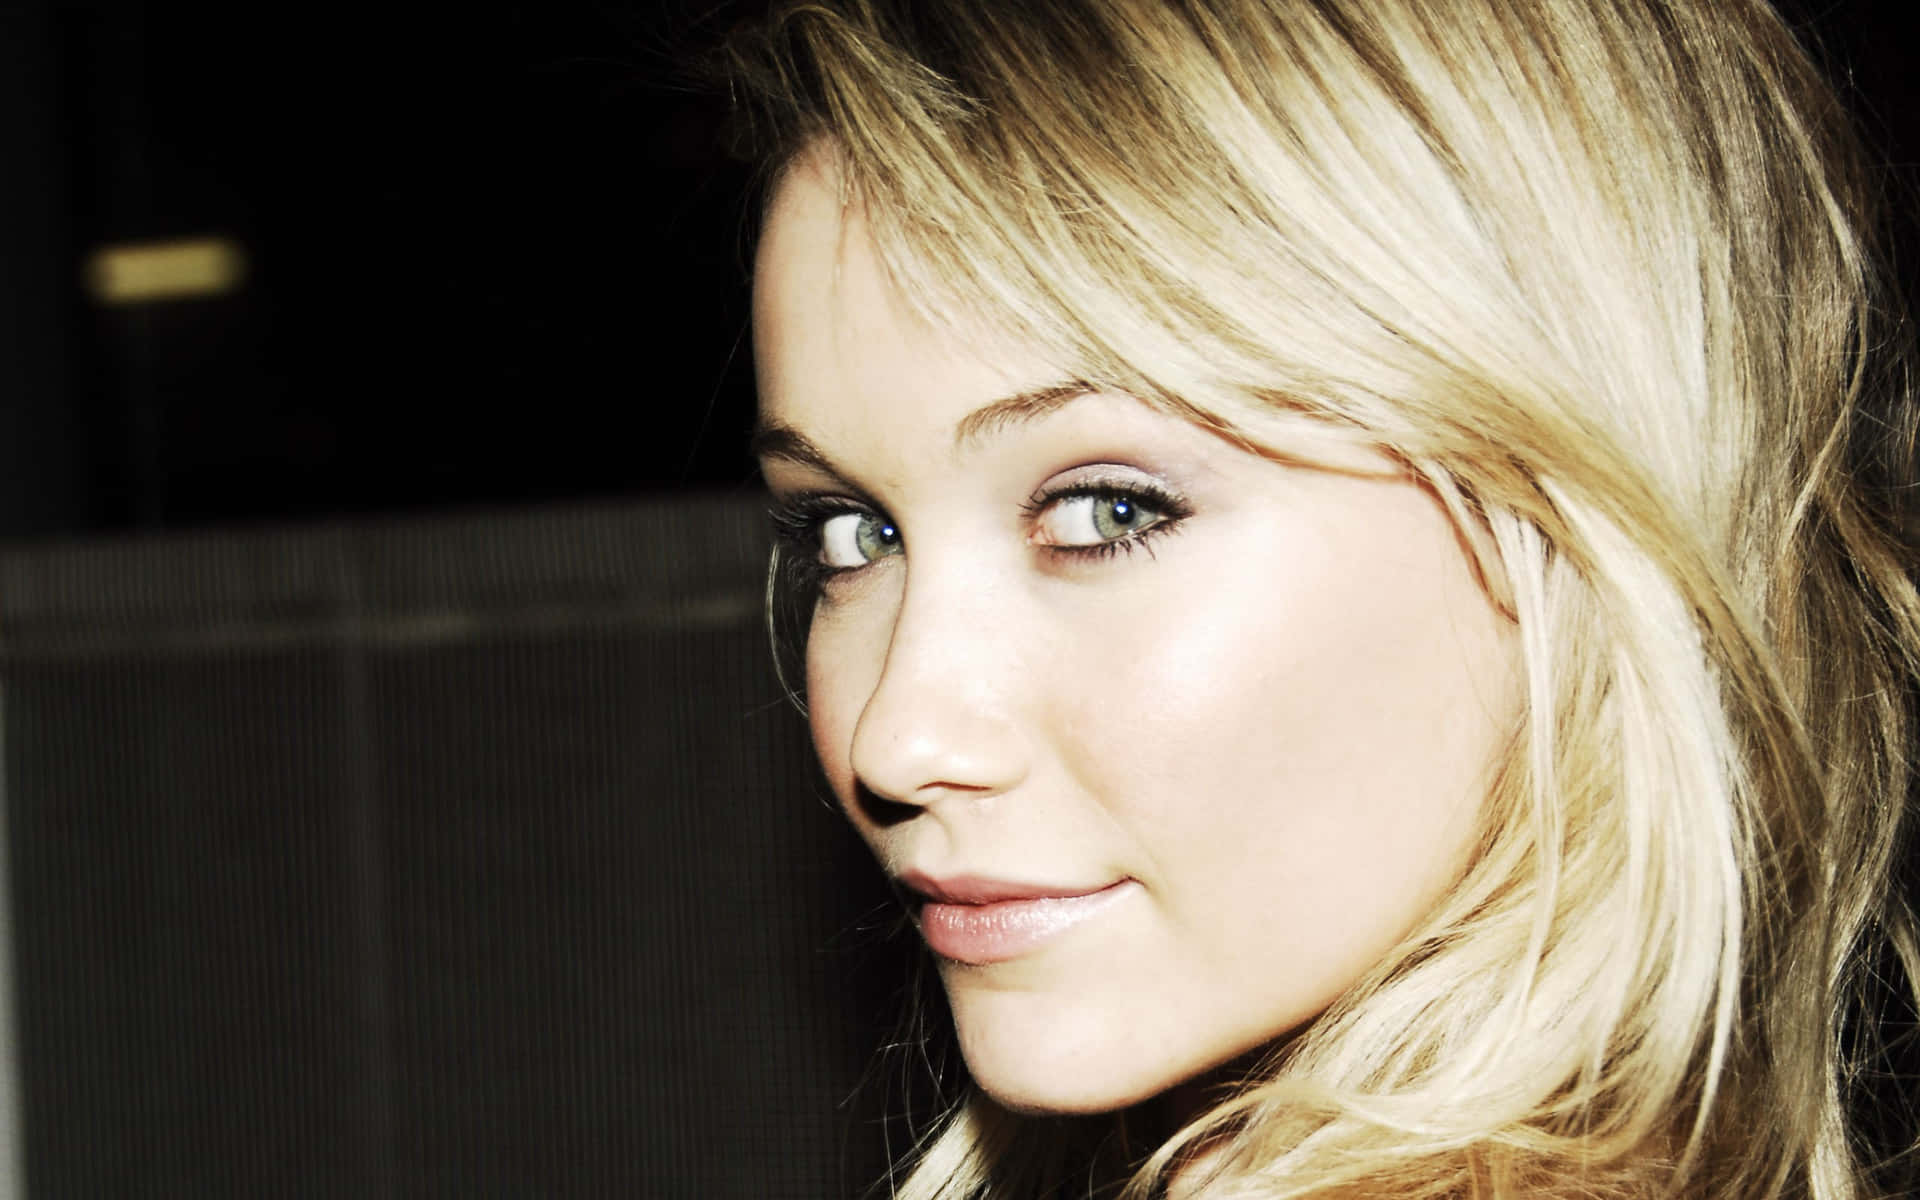 Katrina Bowden looking stunning in a glamorous outfit Wallpaper